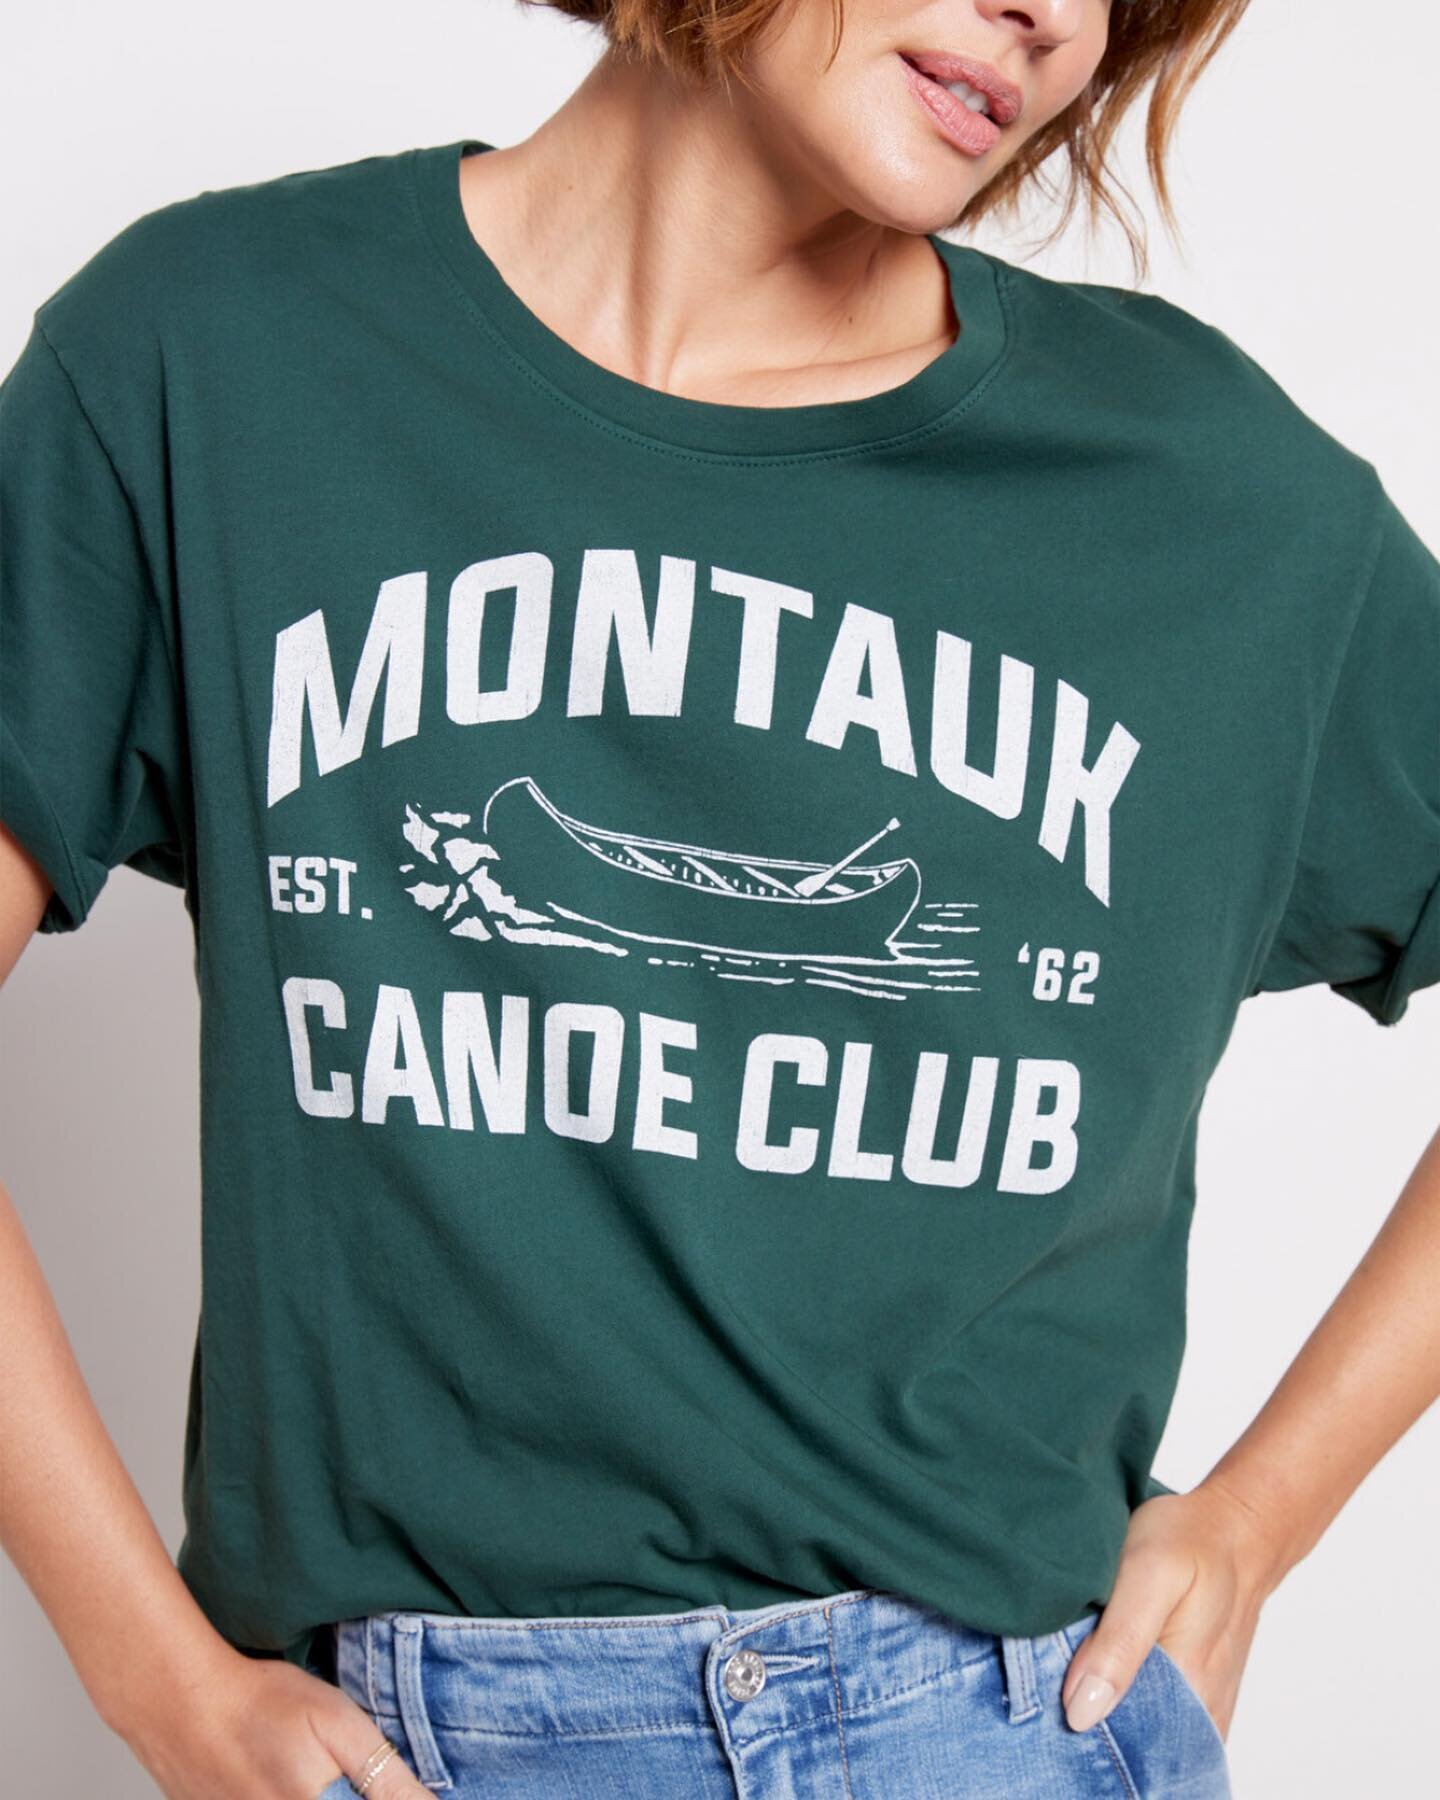 Spoiler alert: this style is blowing out @evereveofficial 🔥. Letluv Montauk Canoe Club tee in pine #destinationart #graphictee #transitionalstyle #montauk #prep